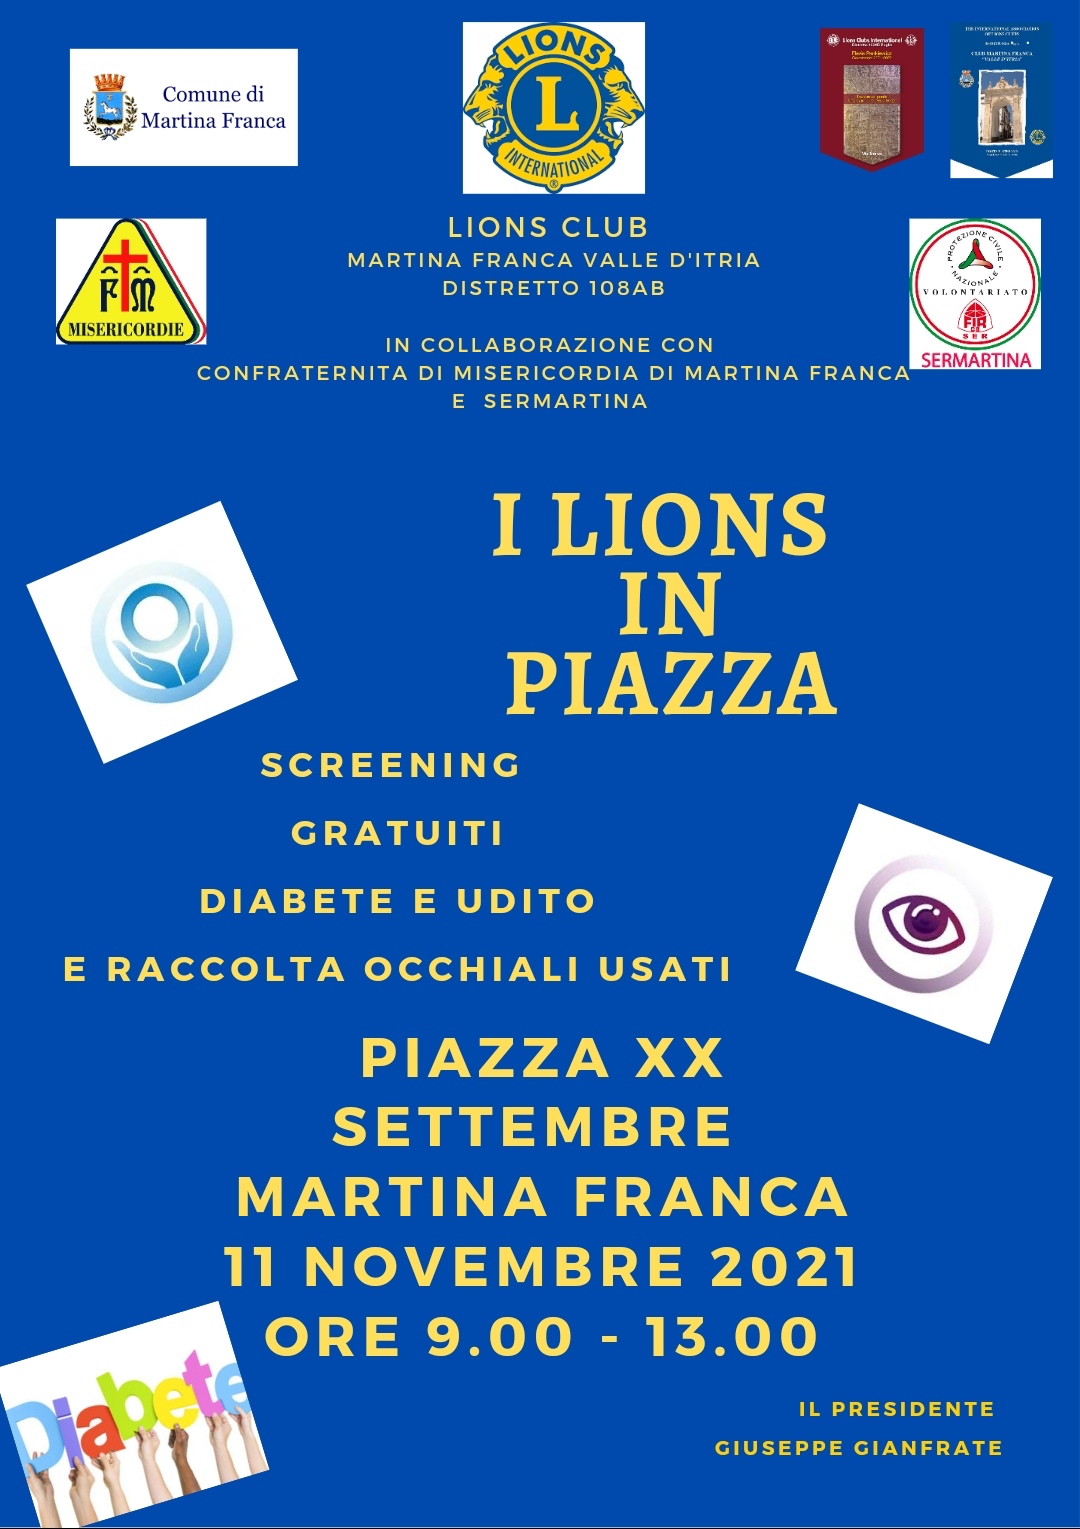 I LIONS IN PIAZZA